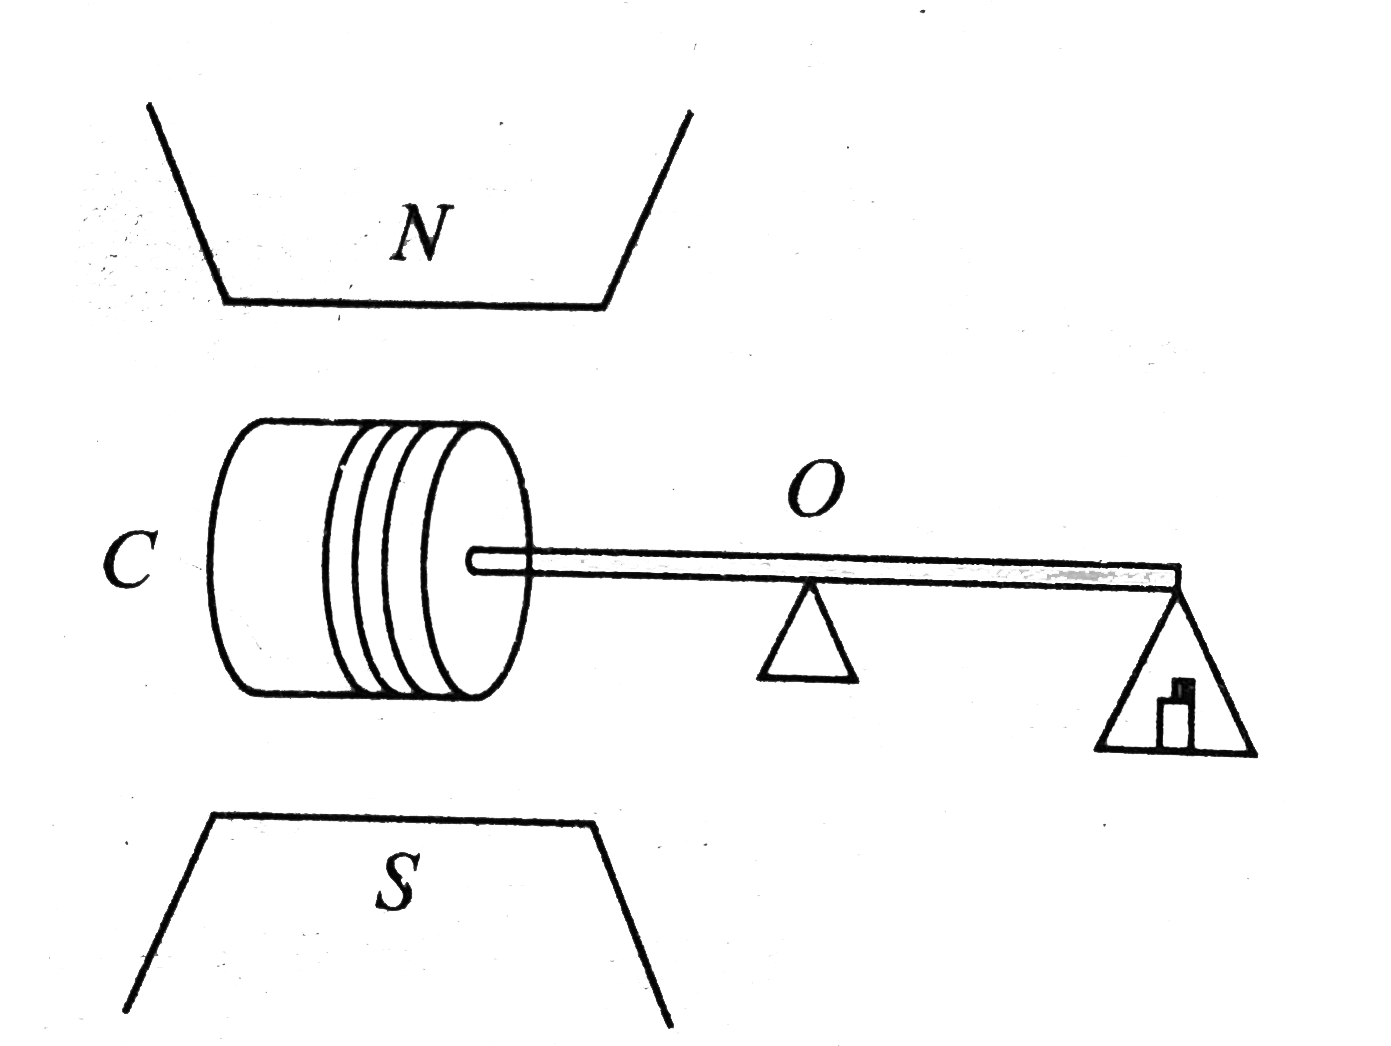 A small coil C with N=200 turns is mounted on one end of a balance beam and introduced between the poles of an electromagnetic as shown in Fig. The area of the coils is S=1cm^2, the length of the right arm of the balance beam is l=30cm. When there is no current in the coil the balance is in equilibrium. On passing is a currentI=22mA through the coil, equilibrium is restored by putting an additional weight of mass m=60mg on the balance pan. Find the magnetic induction field (in terms of x10^-1T) between the poles of the electromagnetic assuming it to be uniform.